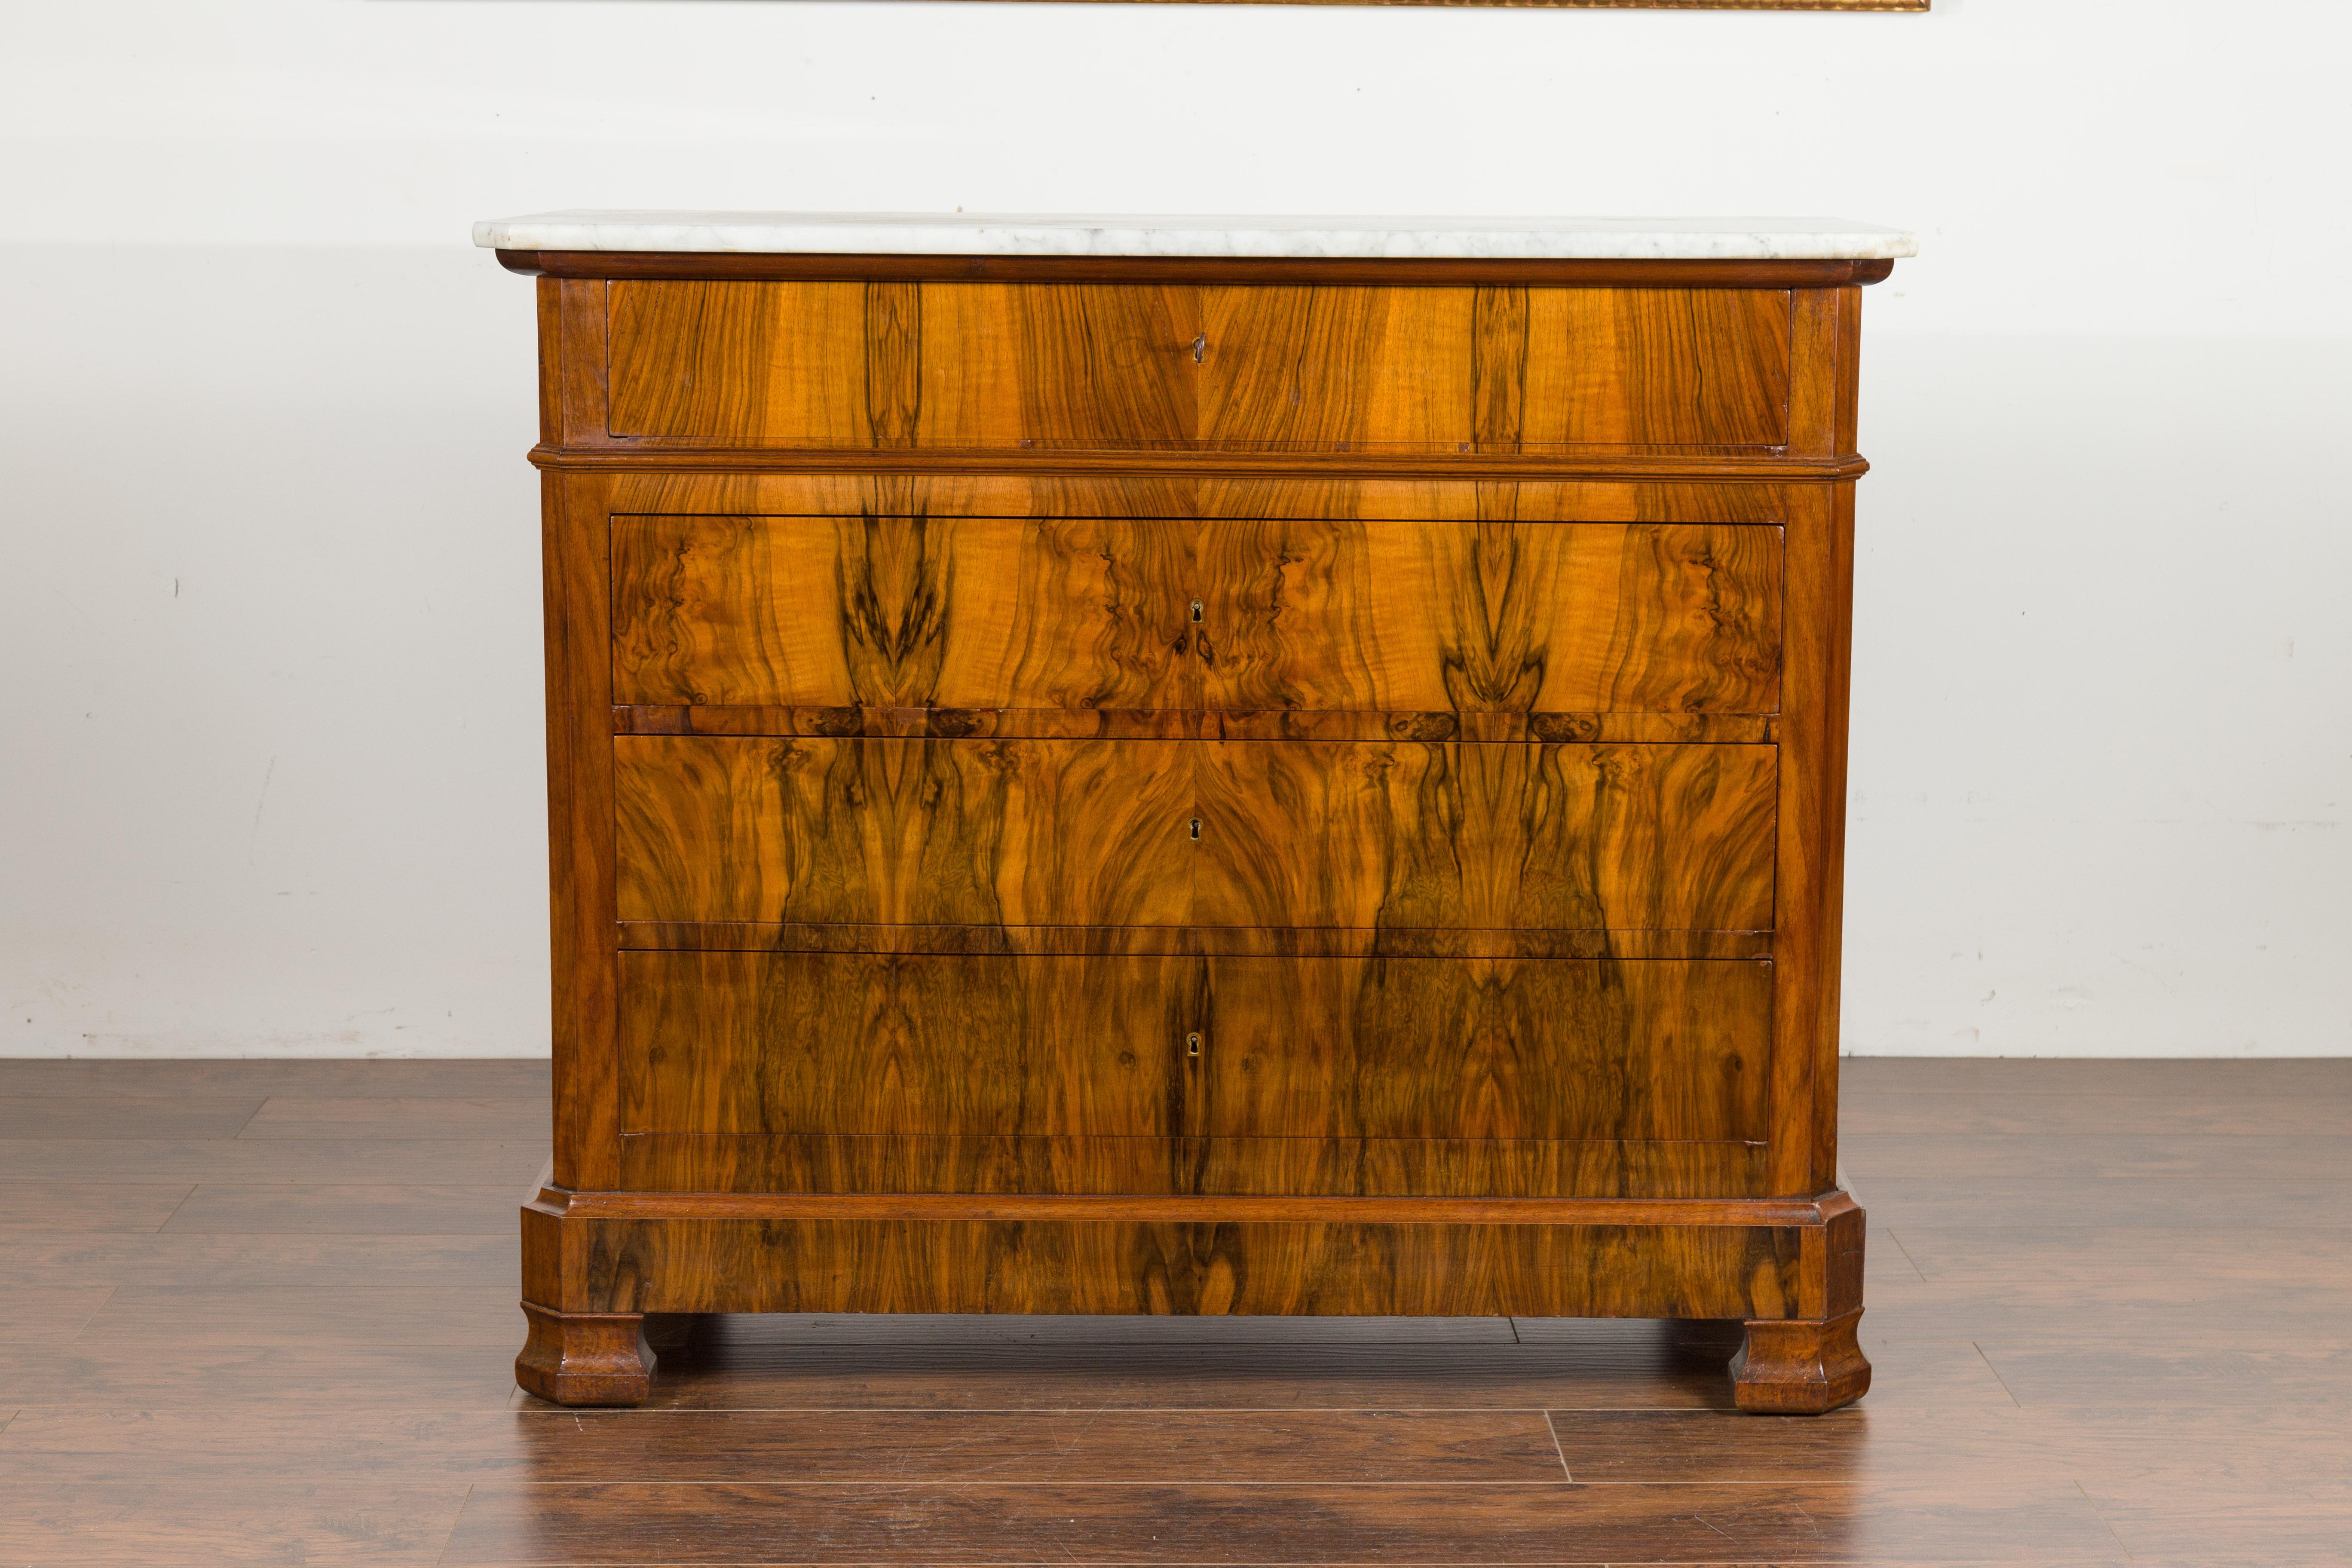 A French Napoléon III period veneered four-drawer commode from the late 19th century, with white marble top. Created in France at the end of Emperor Napoléon III's reign, this wooden commode features a rectangular white veined marble top with canted